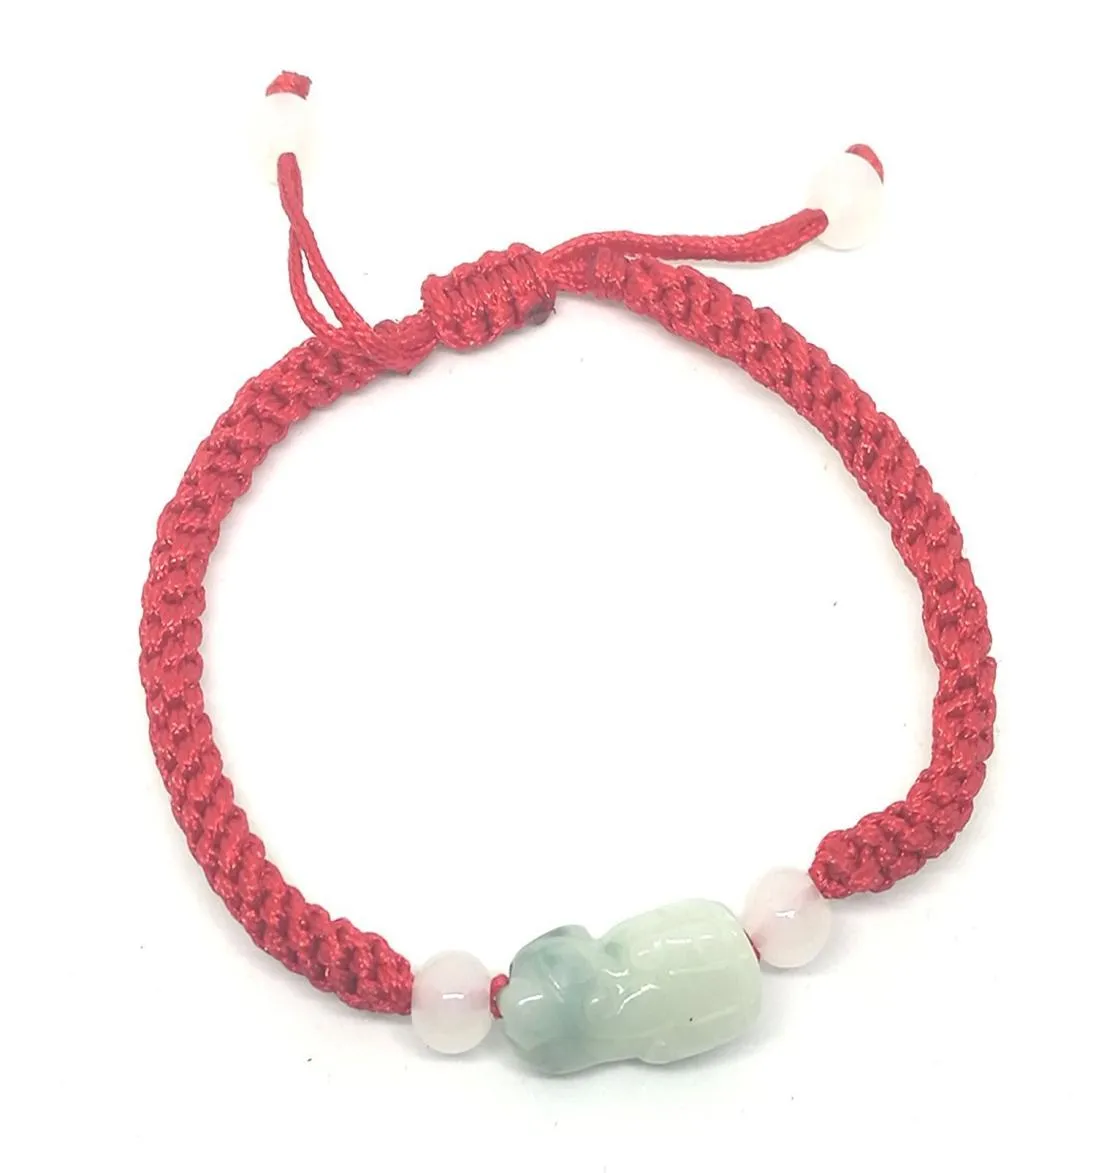 Natural Jade Handwoven Rope Adjustable Bracelet Fashion Temperament Jewelry Gems Accessories Gifts Whole3524390